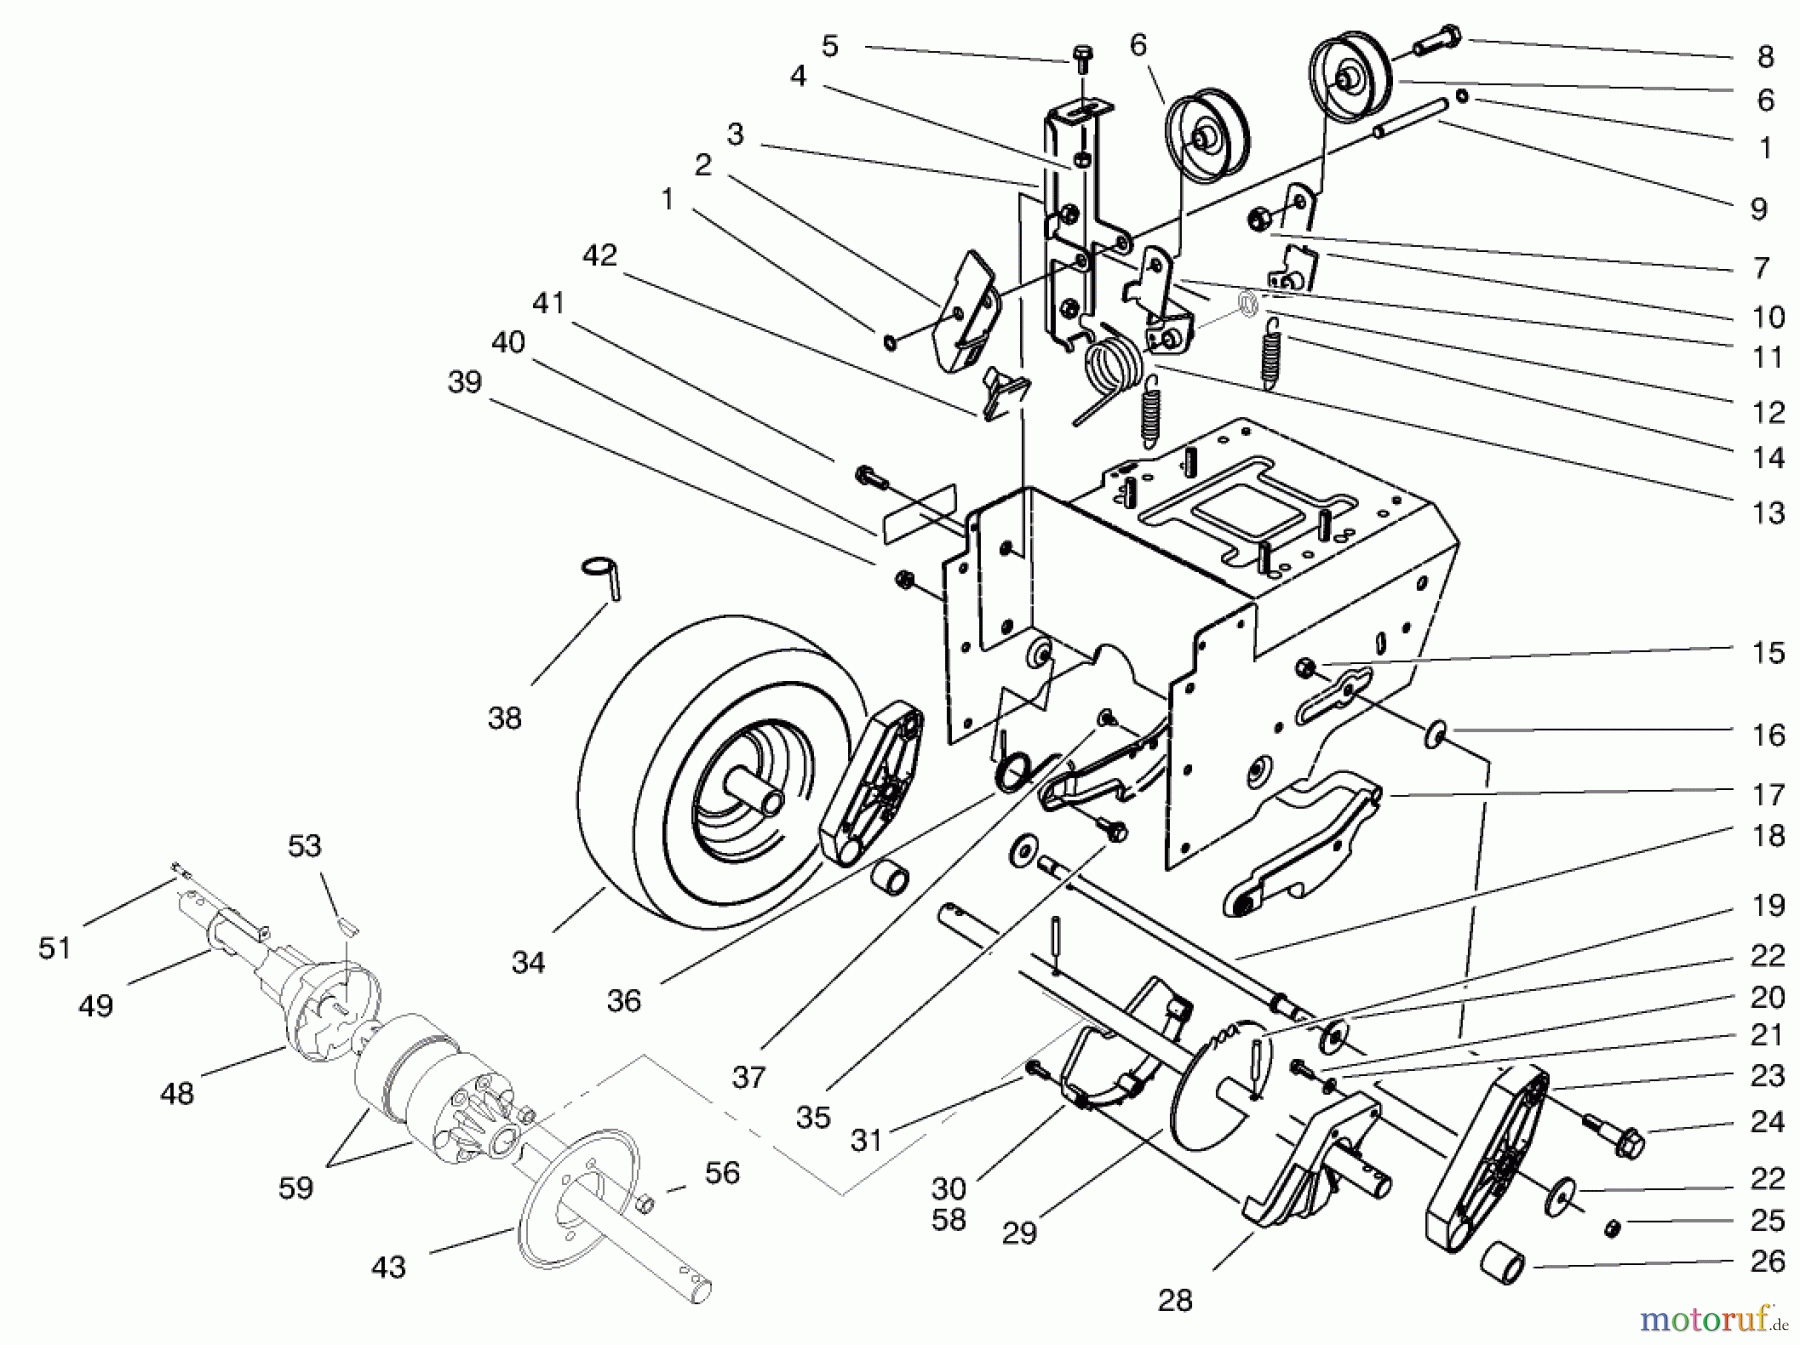  Toro Neu Snow Blowers/Snow Throwers Seite 1 38591 (1232) - Toro 1232 Power Shift Snowthrower, 1997 (7900001-7999999) TRACTION DRIVE ASSEMBLY